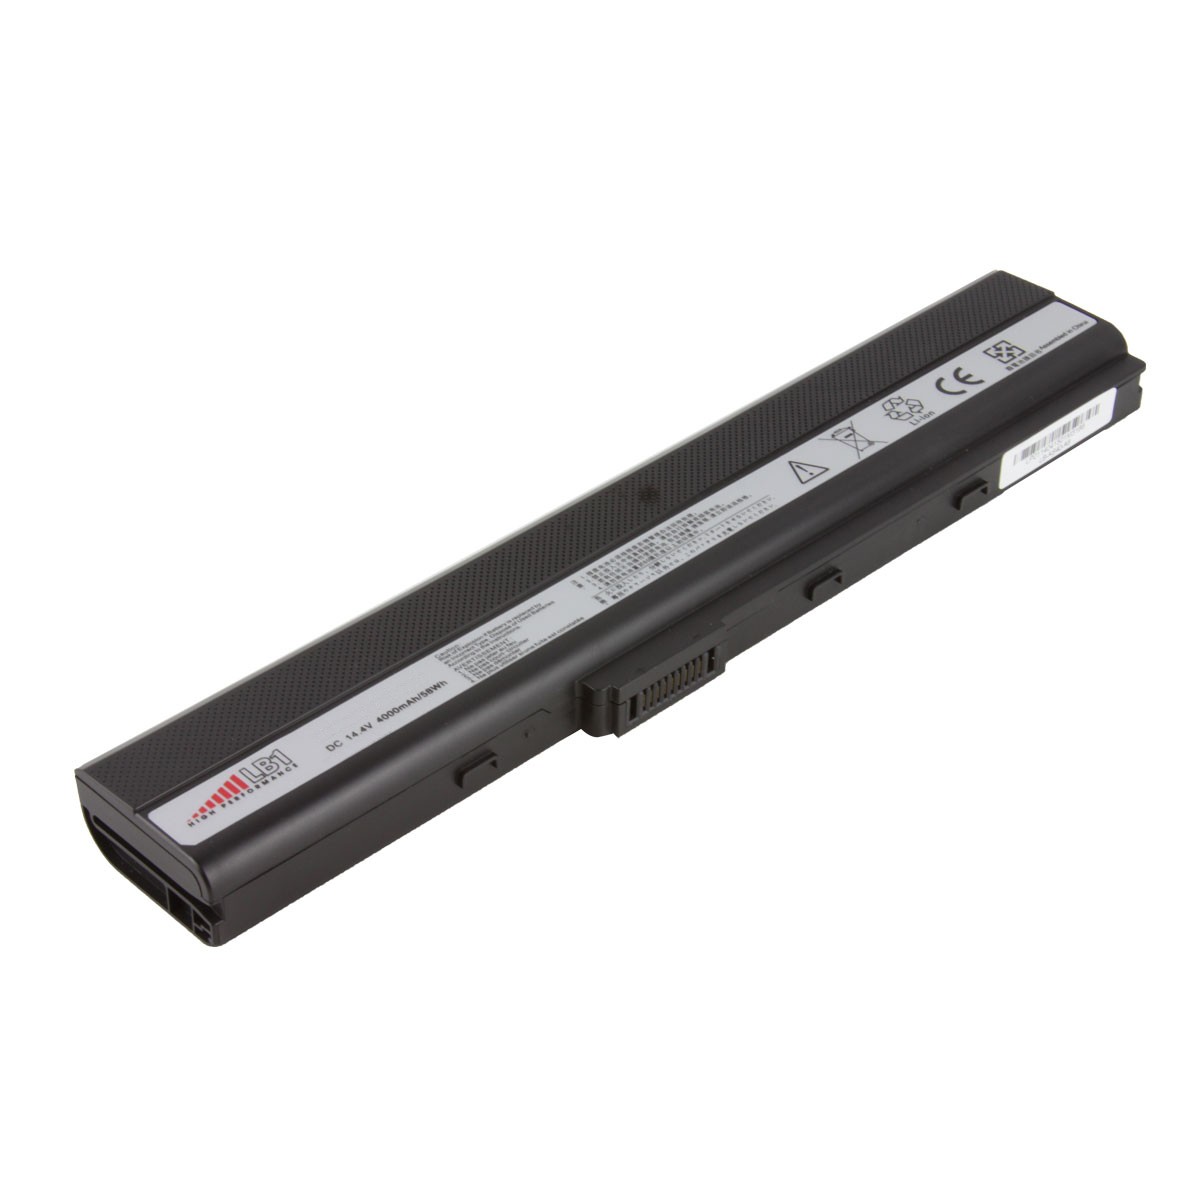 BATTERY FOR NOTEBOOK ASUS A32- K52  K42 M&M COPY ,Laptop Battery